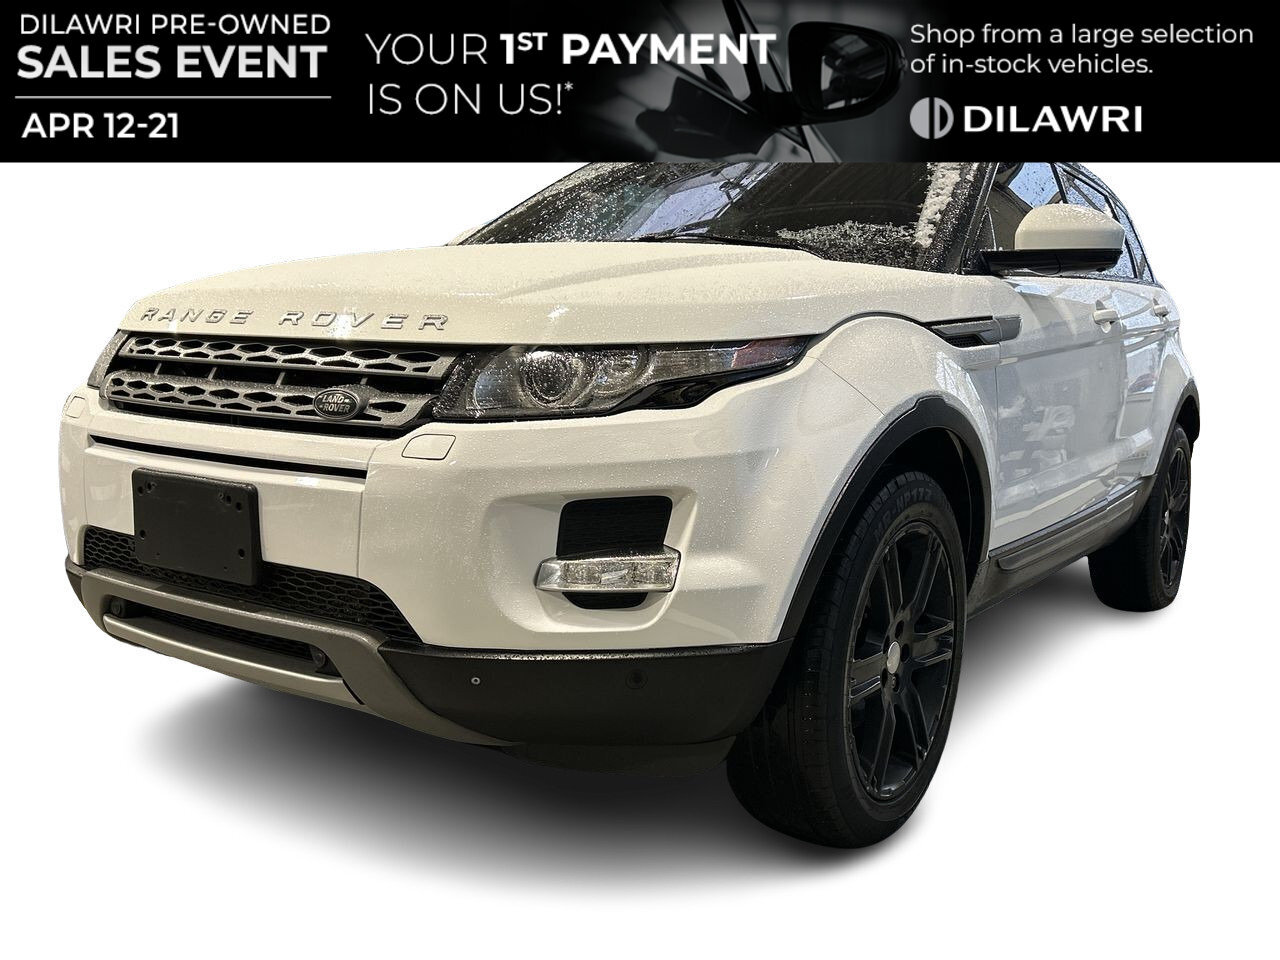 2015 Land Rover Range Rover Evoque Pure Plus As Is - Clean Carfax I 2 Tone Exterior I